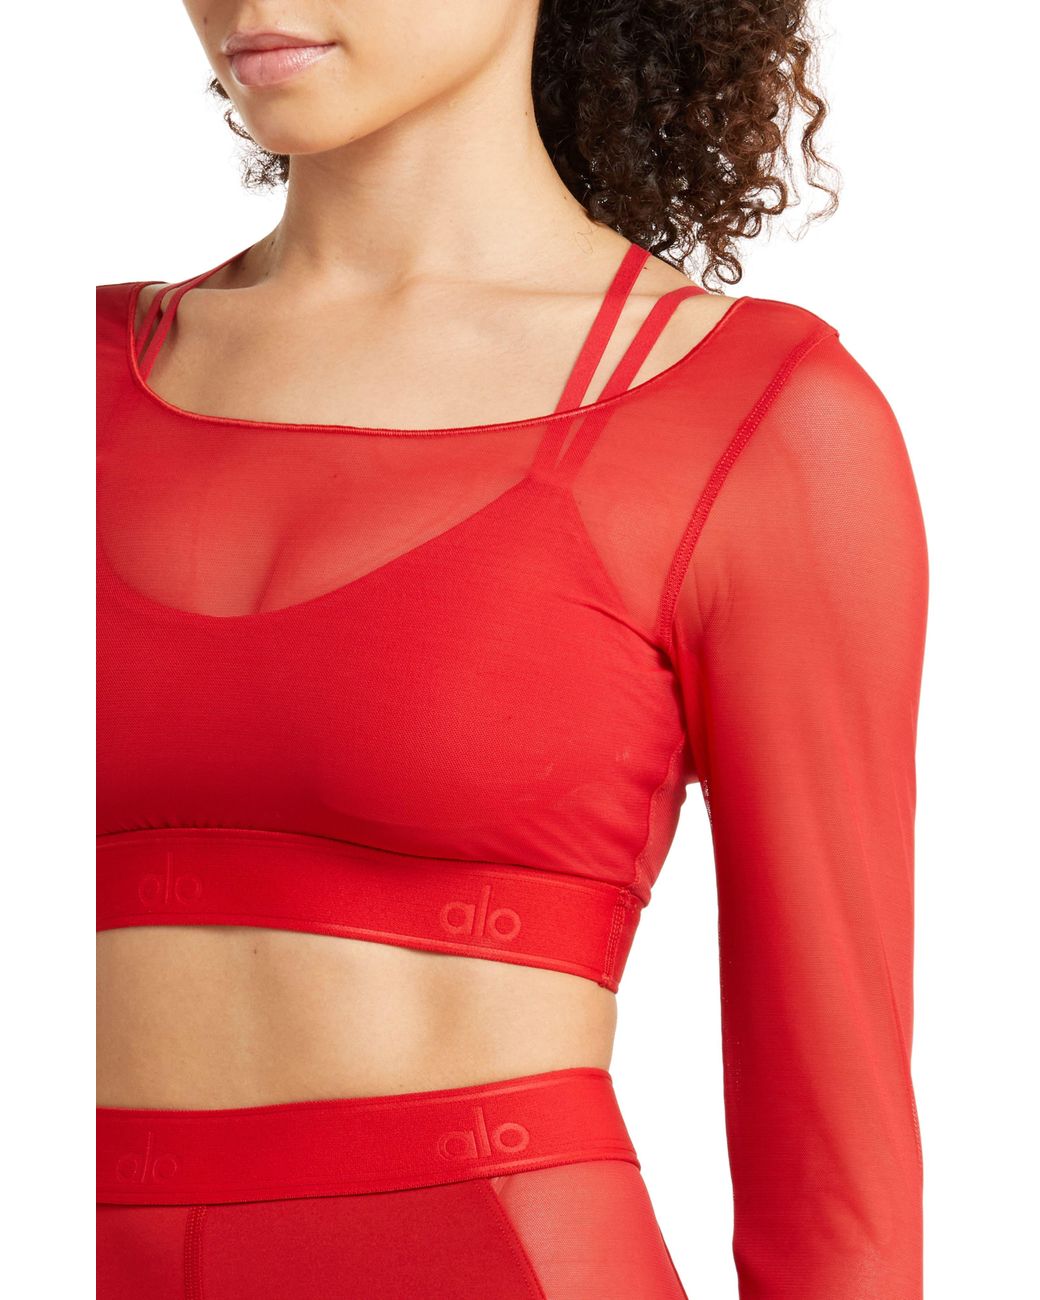 IGNITE-Long Sleeve workout top- Yummy Red – Bella Bustiere